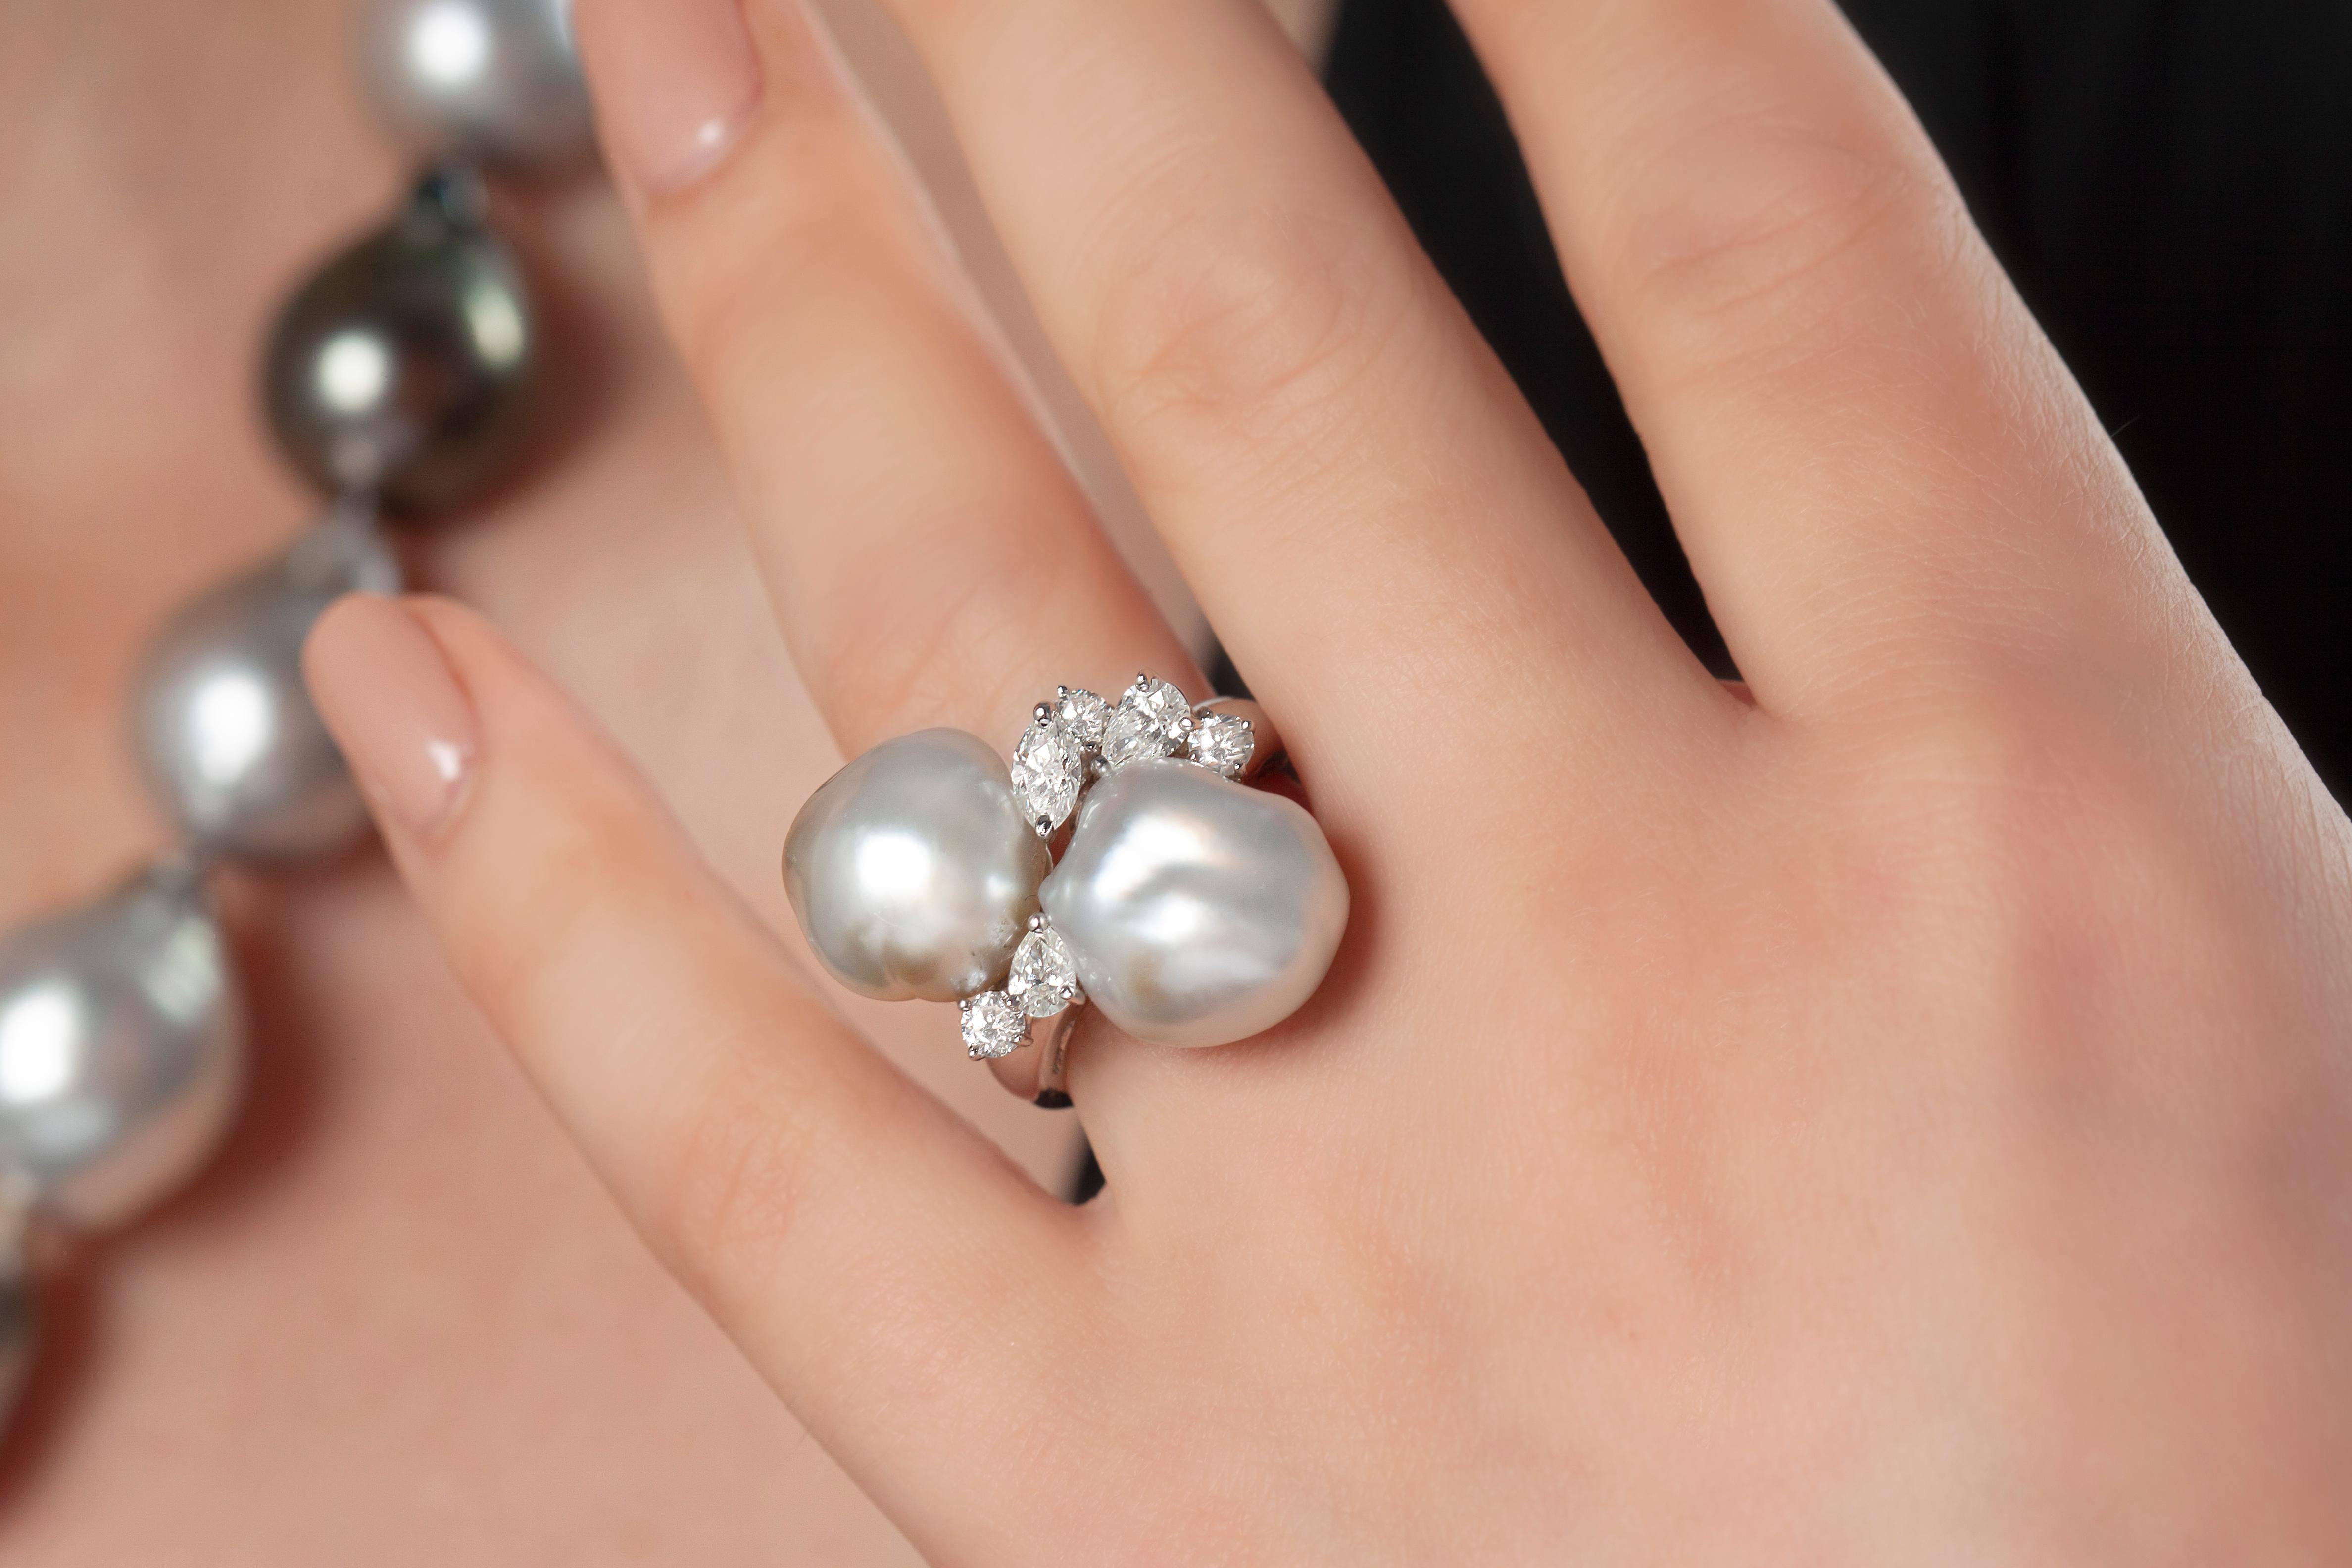 This hypnotic ring by Yoko London features two mesmeric 13-14mm South Sea Keshi pearls, set amongst a delicate scattering of diamonds. Each Keshi pearl is completely unique and this design perfectly highlights the allure and mystique of these